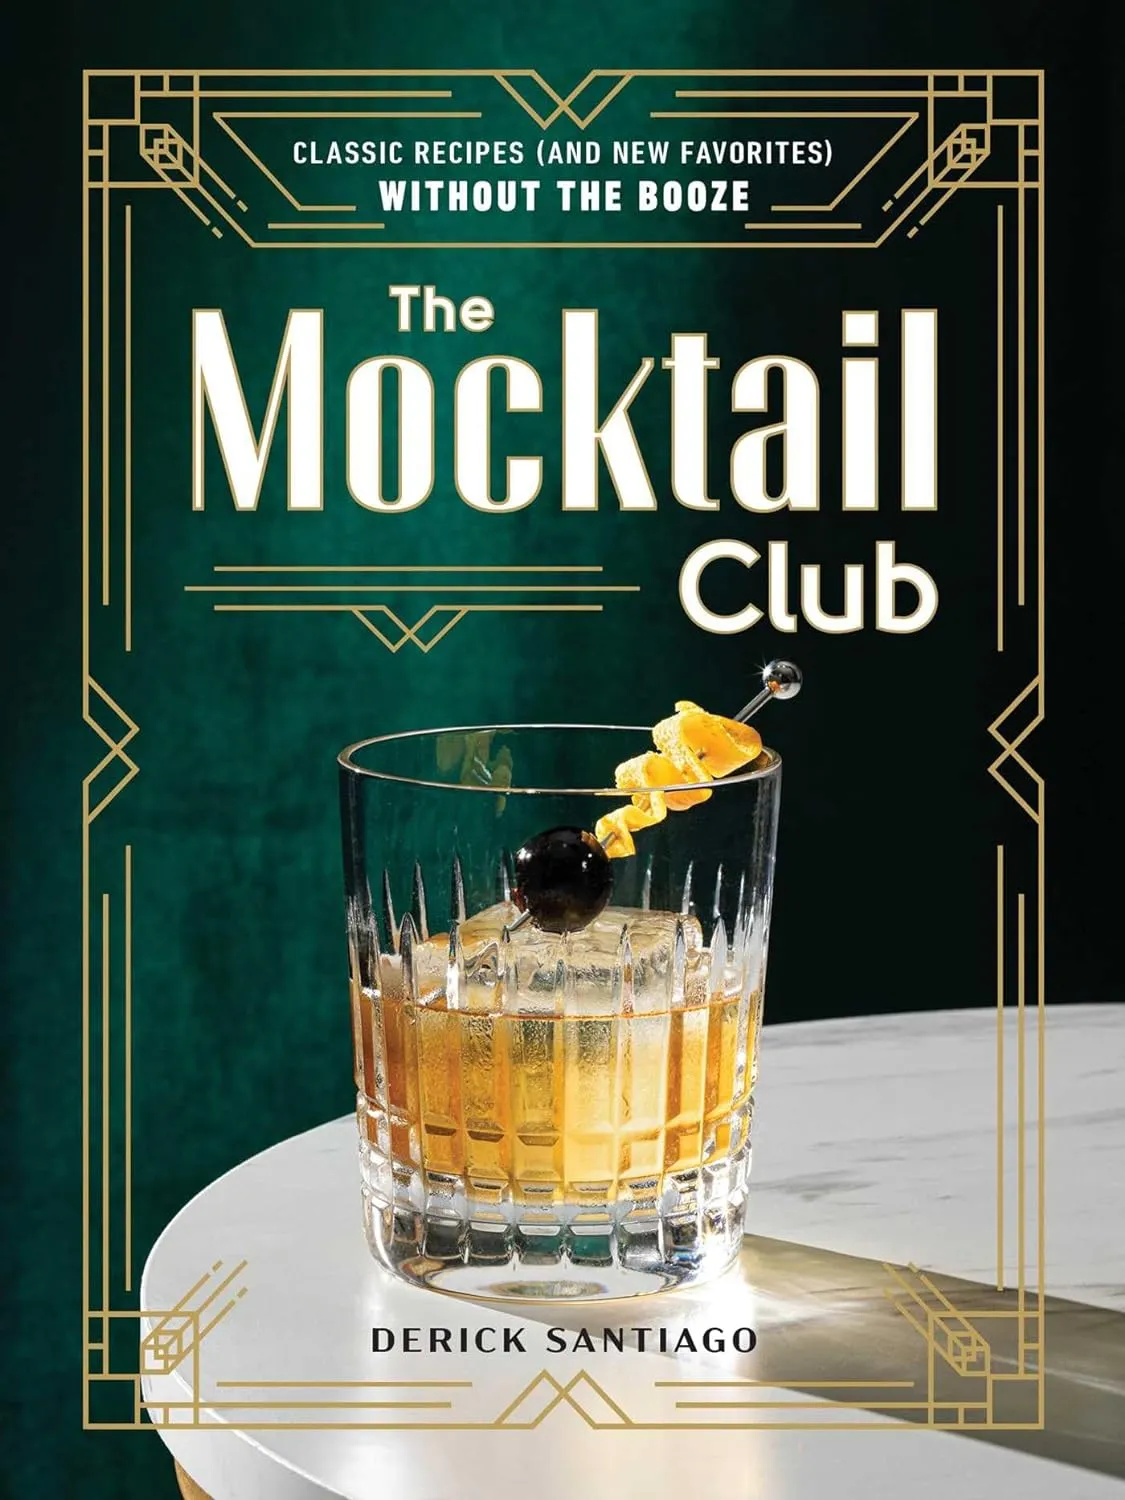 The Mocktail Club book cover